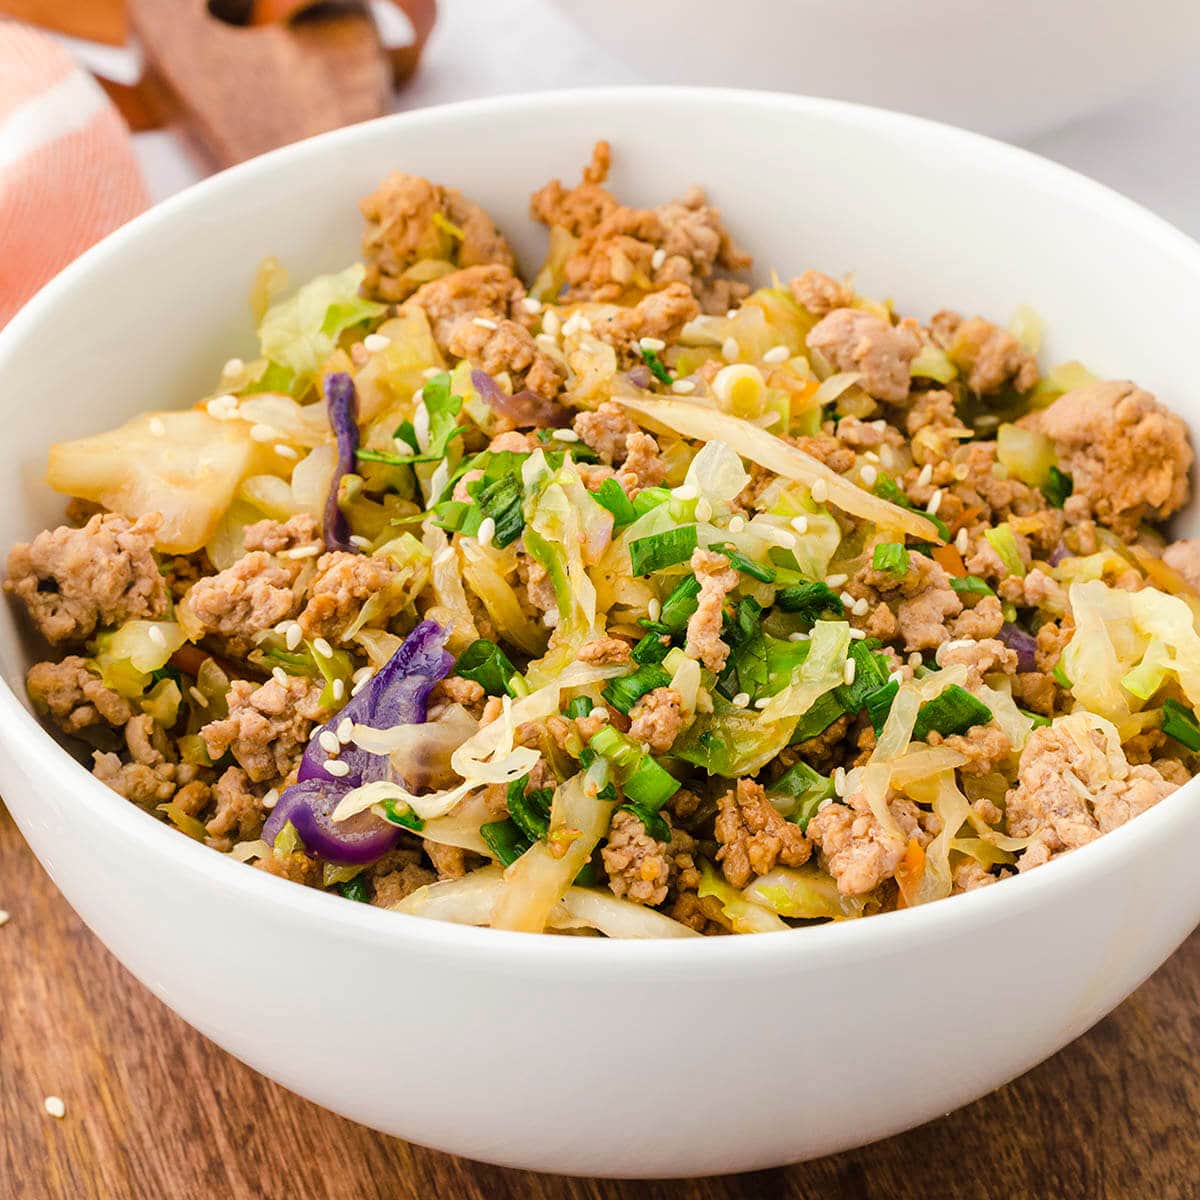 Bowl filled with sausage cabbage Asian stir fry.